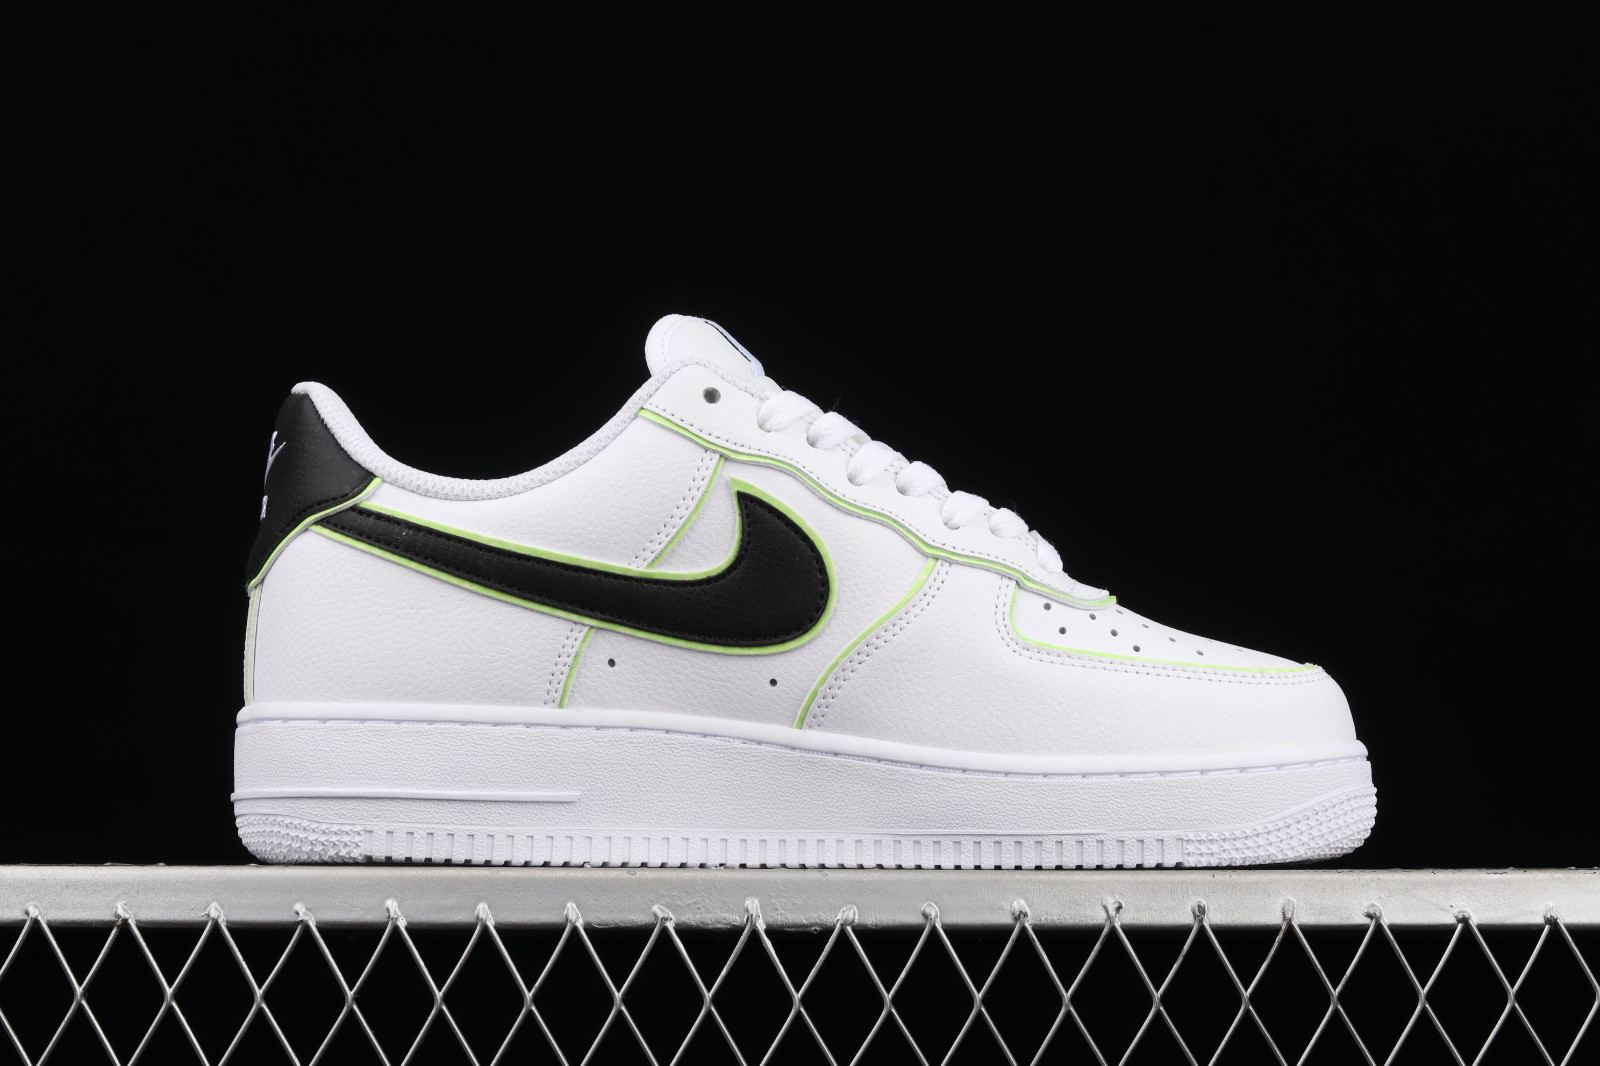 Nike Air Force 07 Low White Black Green Shoes CW2288 - nike lebron sneaker 2015 release schedule - GmarShops - 304